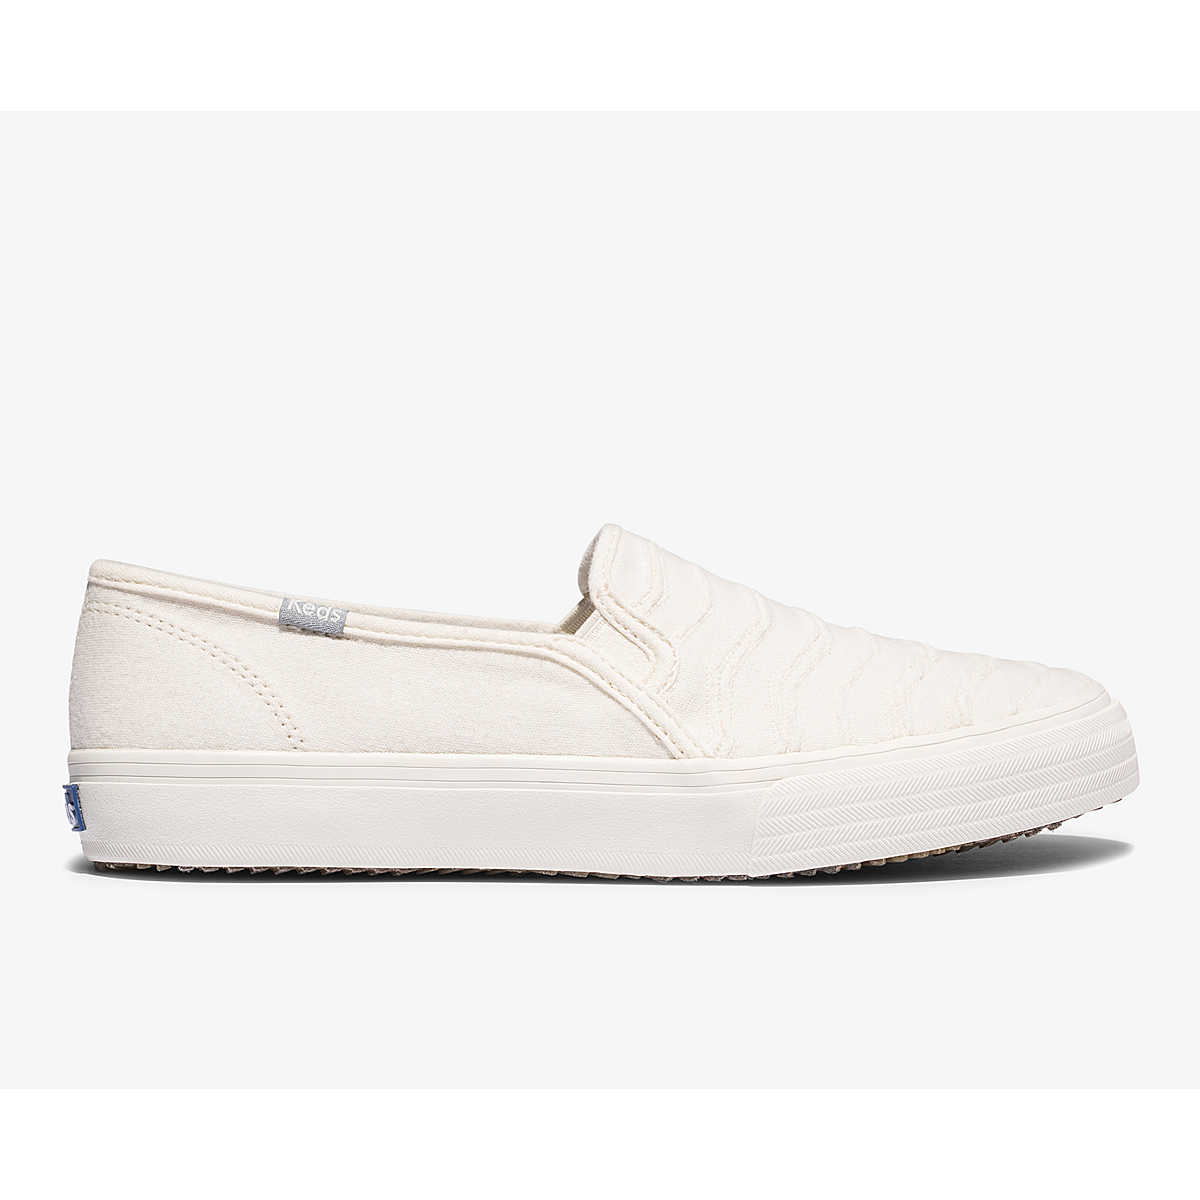 KEDS DOUBLE DECKER RIBBED WAVE JERSEY